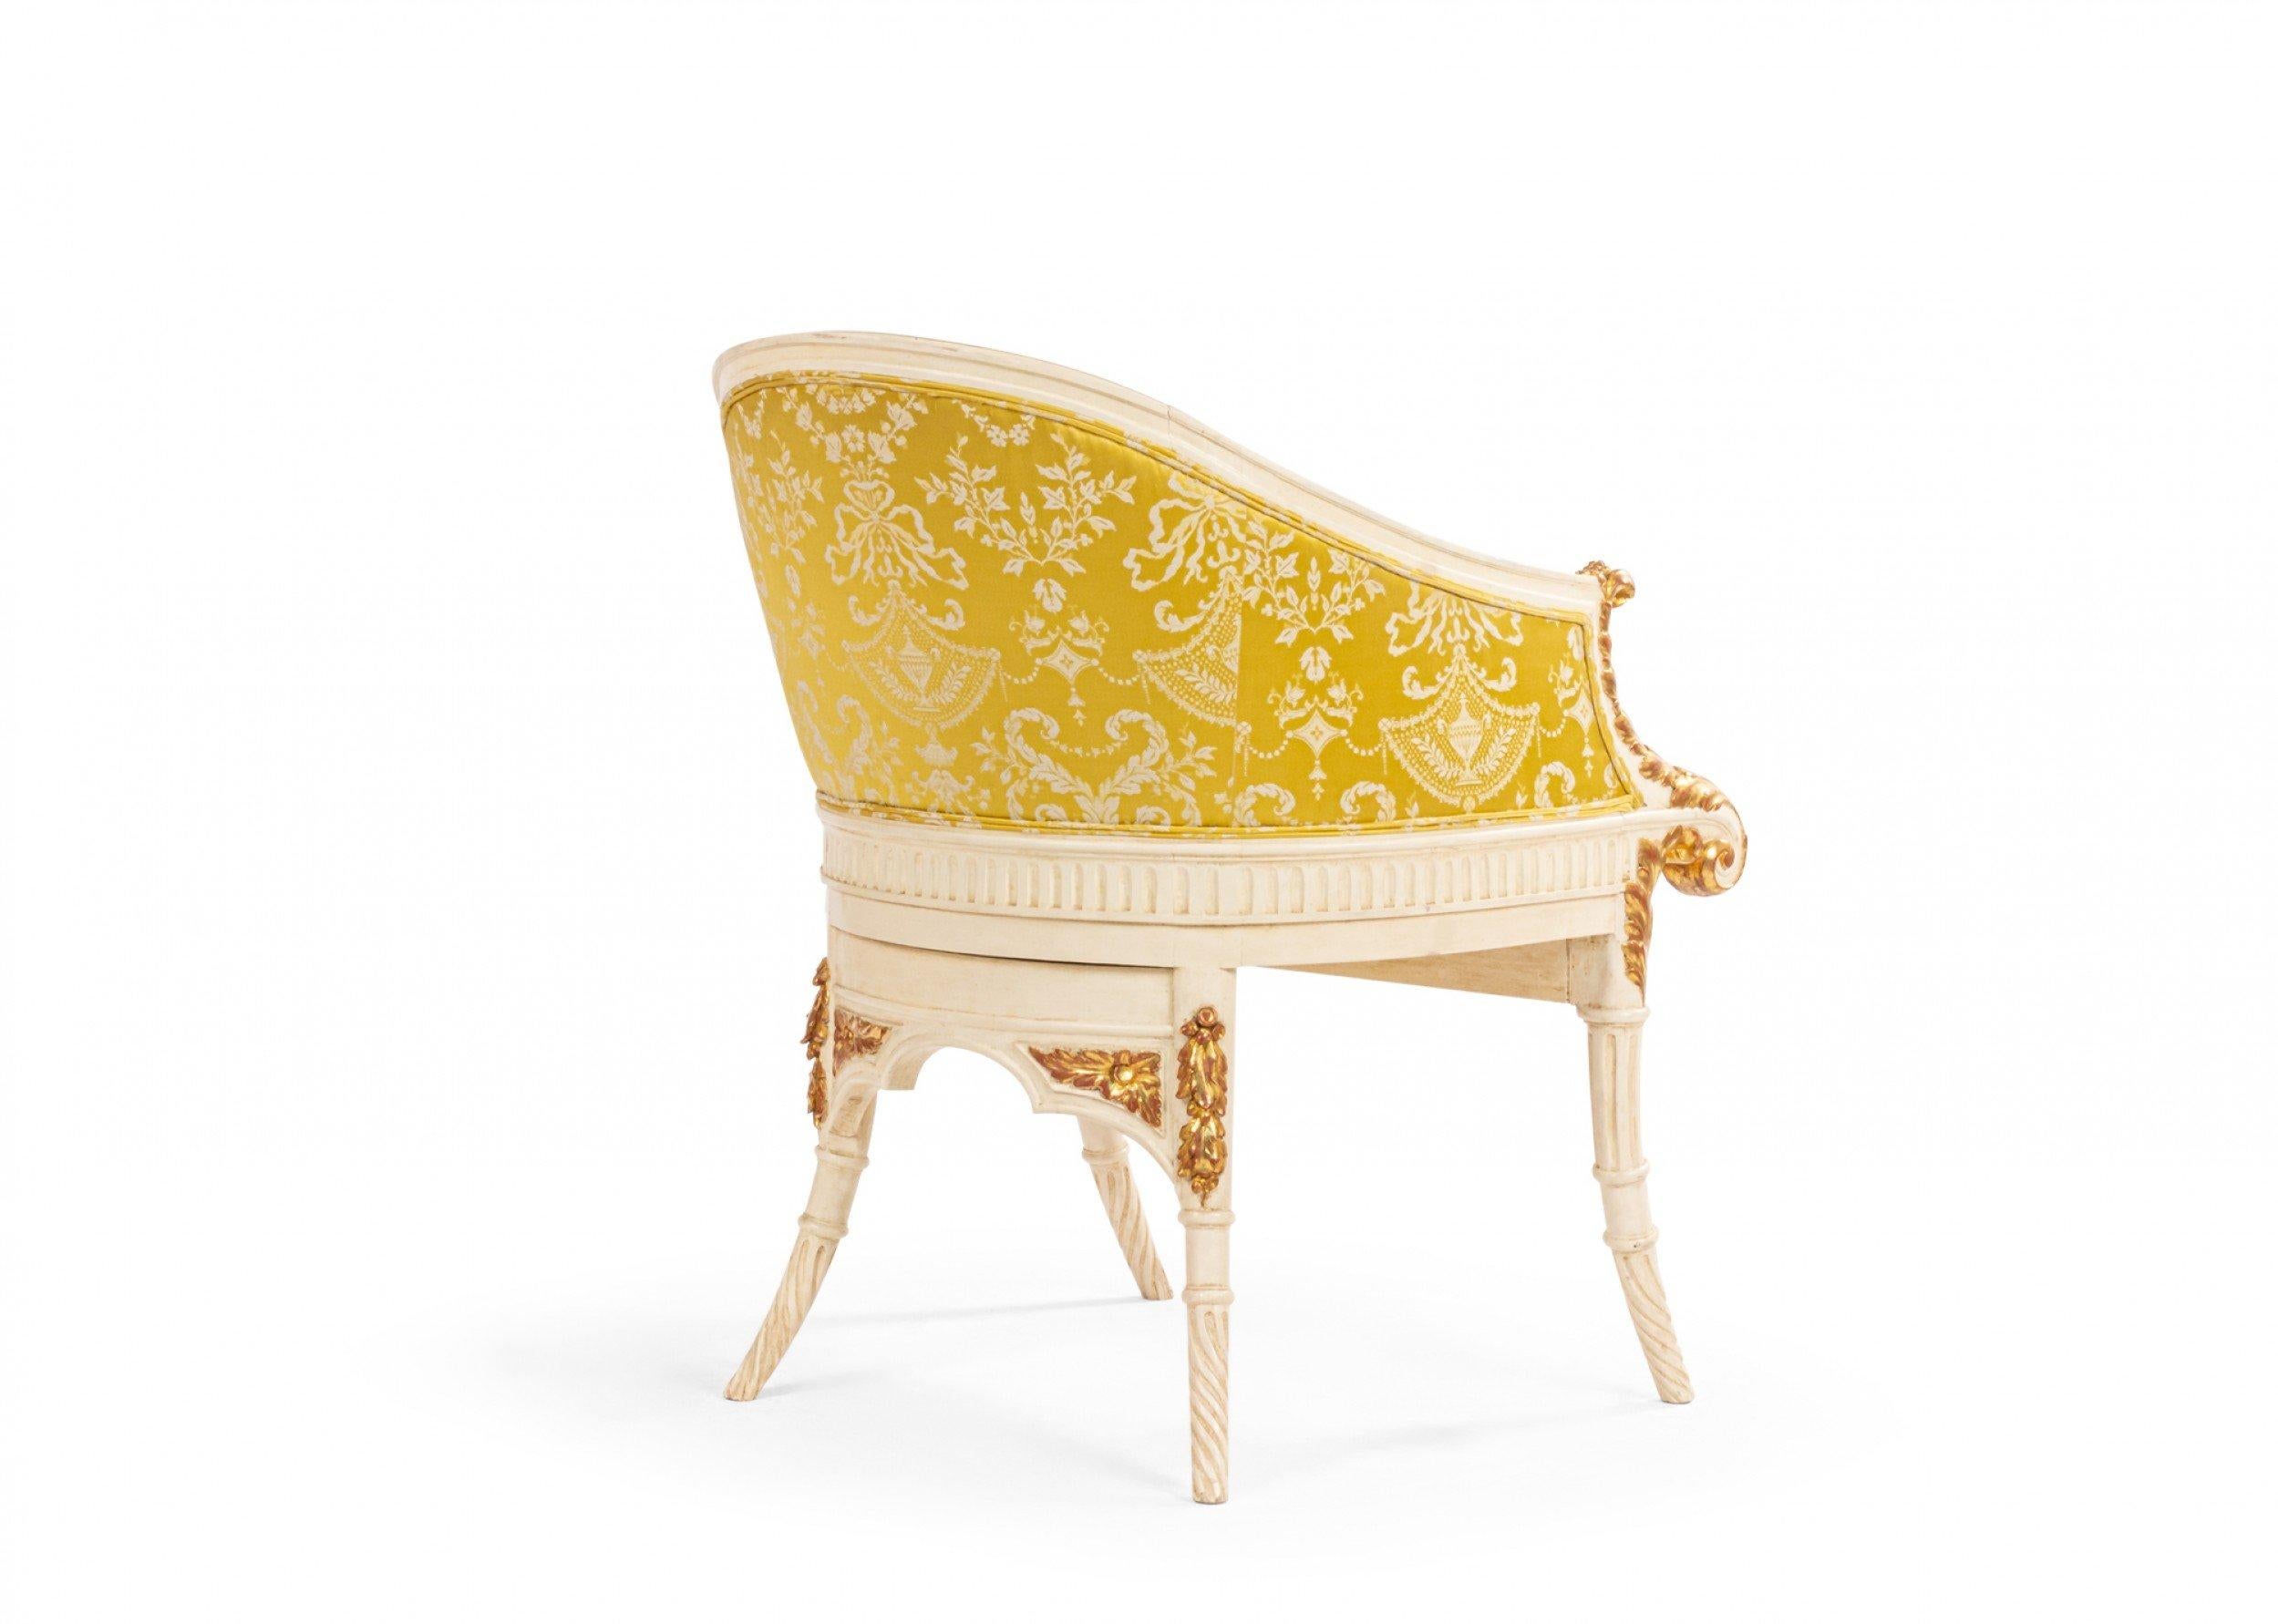 Carved Italian Neo-Classic Style 19th Century White and Gold Arm Chair For Sale